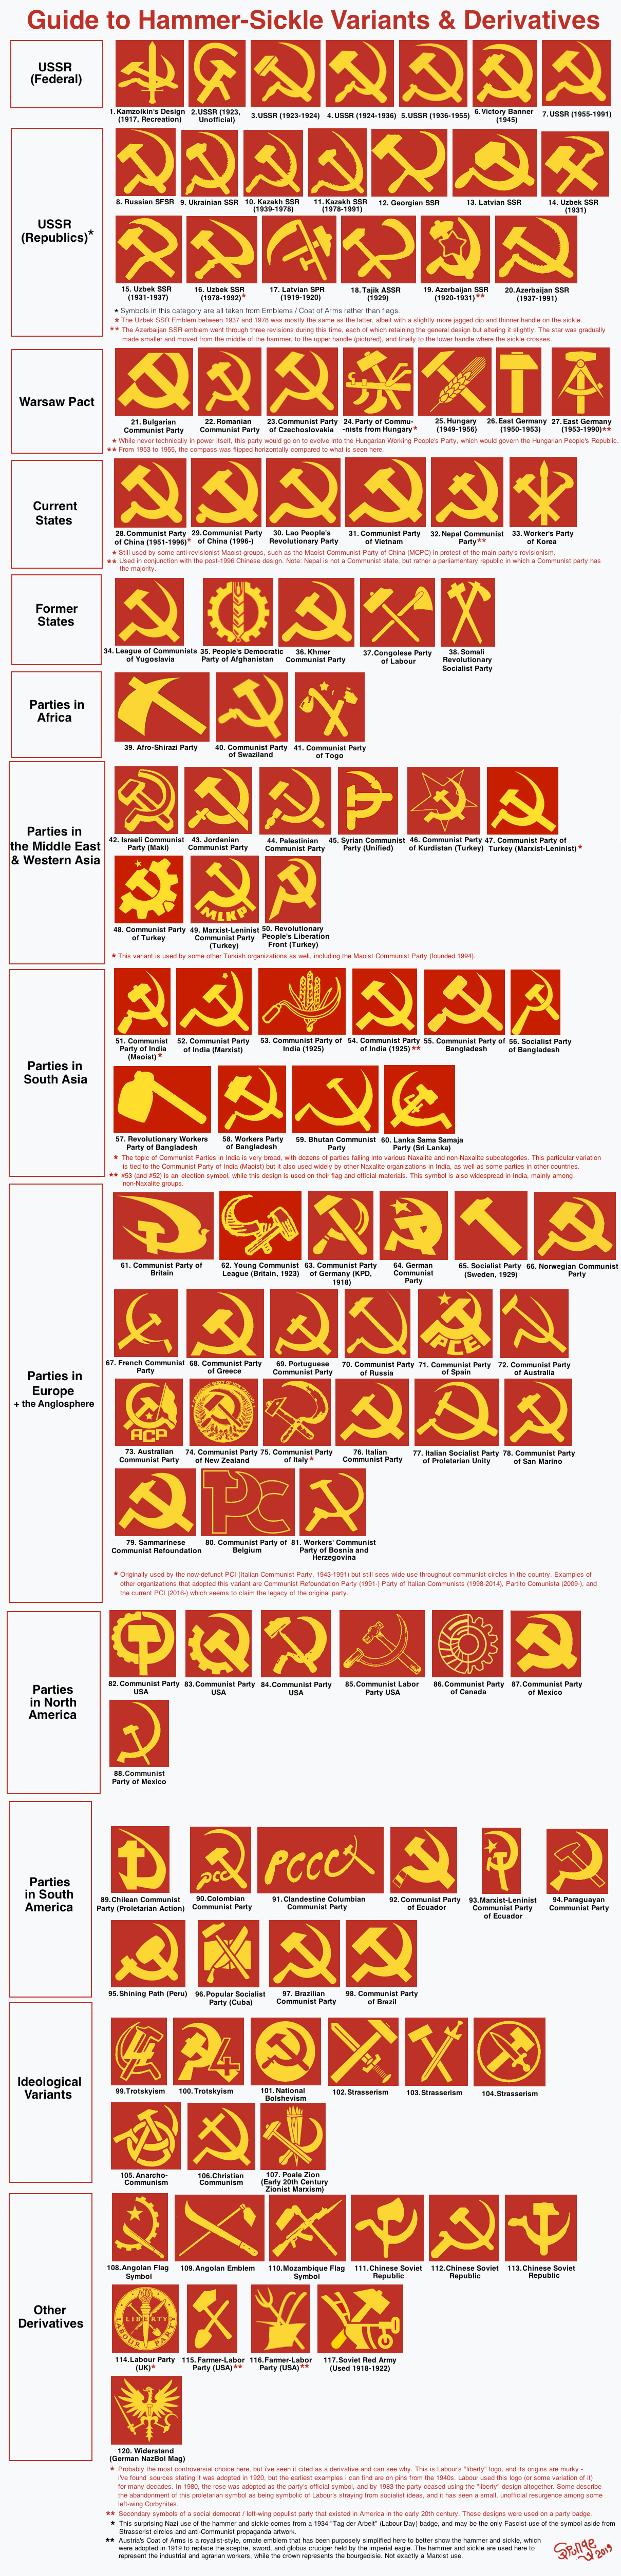 Hammer and sickle ProleWiki